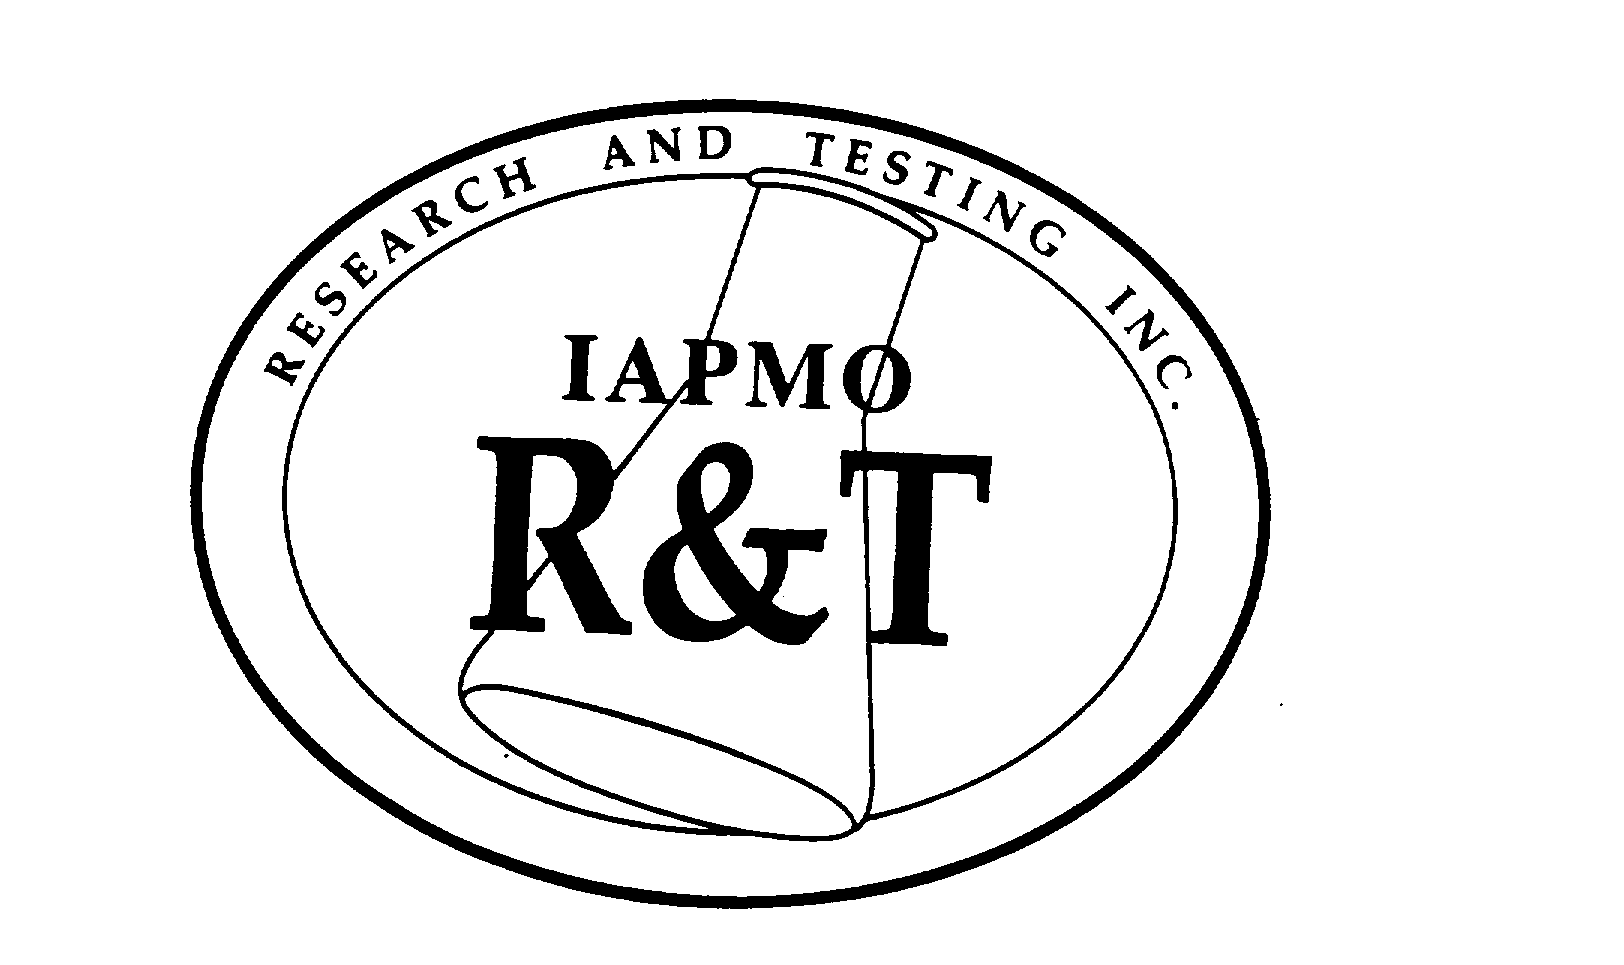  RESEARCH AND TESTING INC. IAPMO R&amp;T